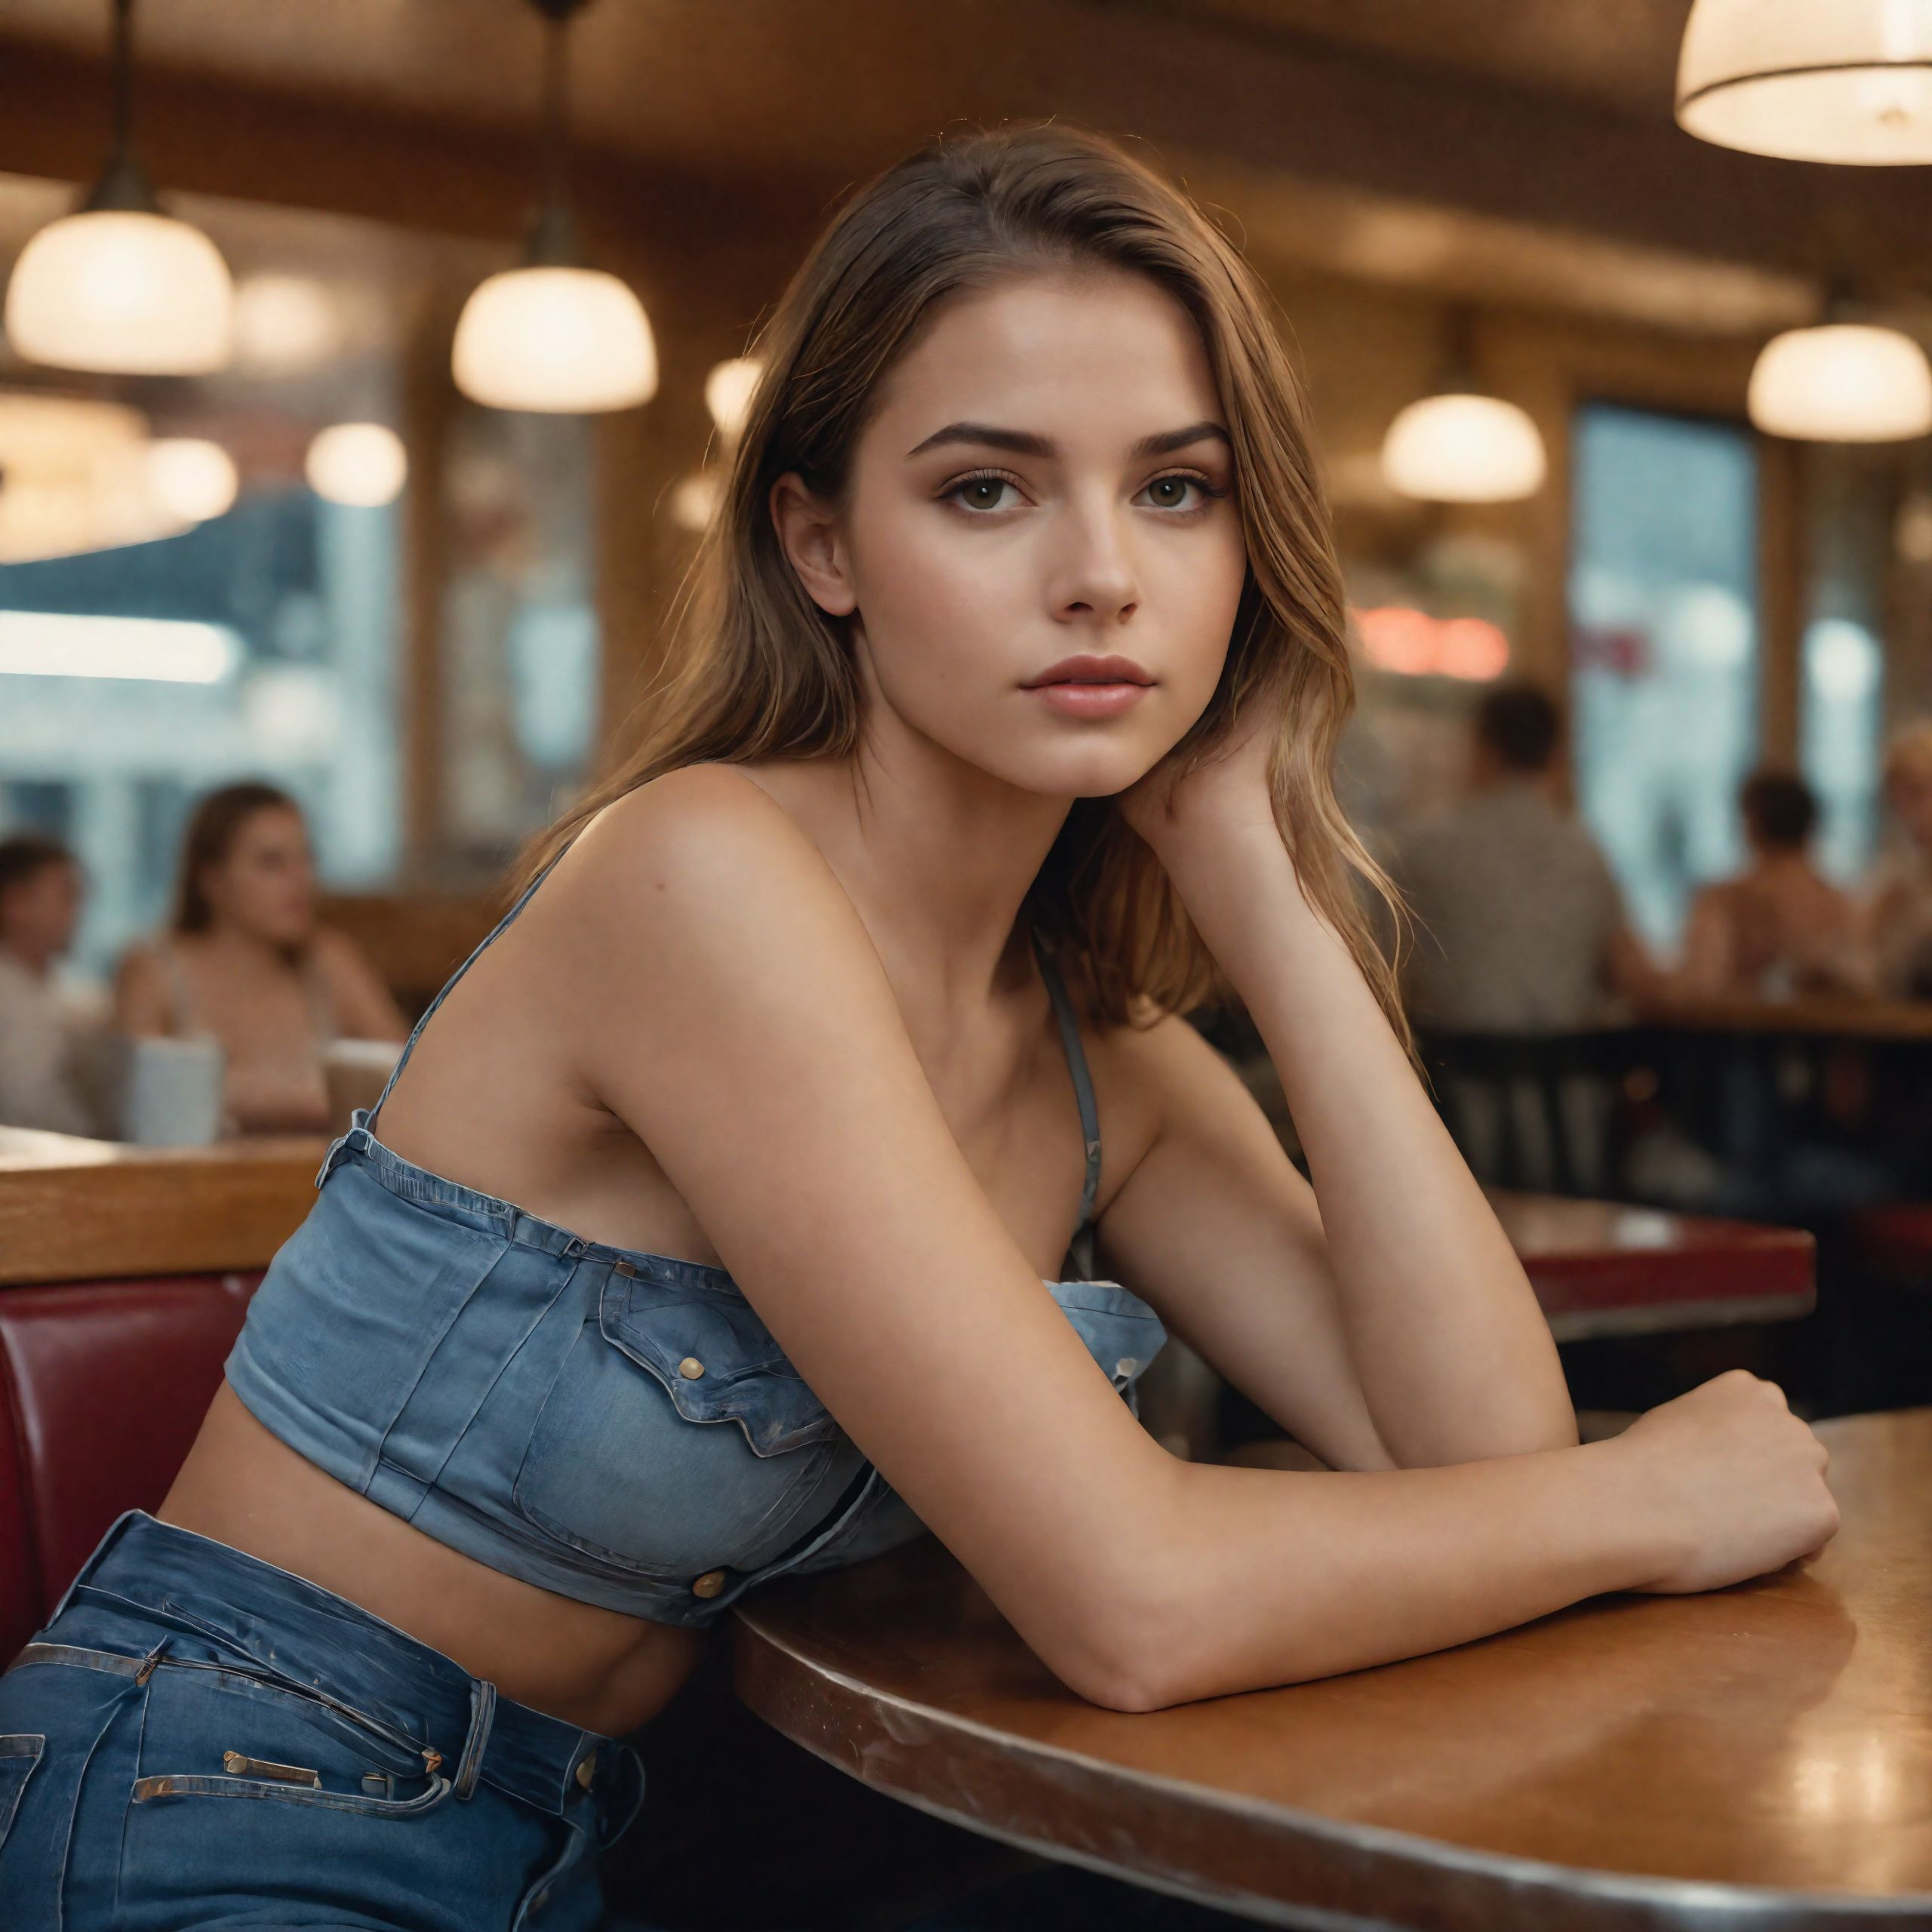 A woman in a denim top sits at a table in a restaurant.